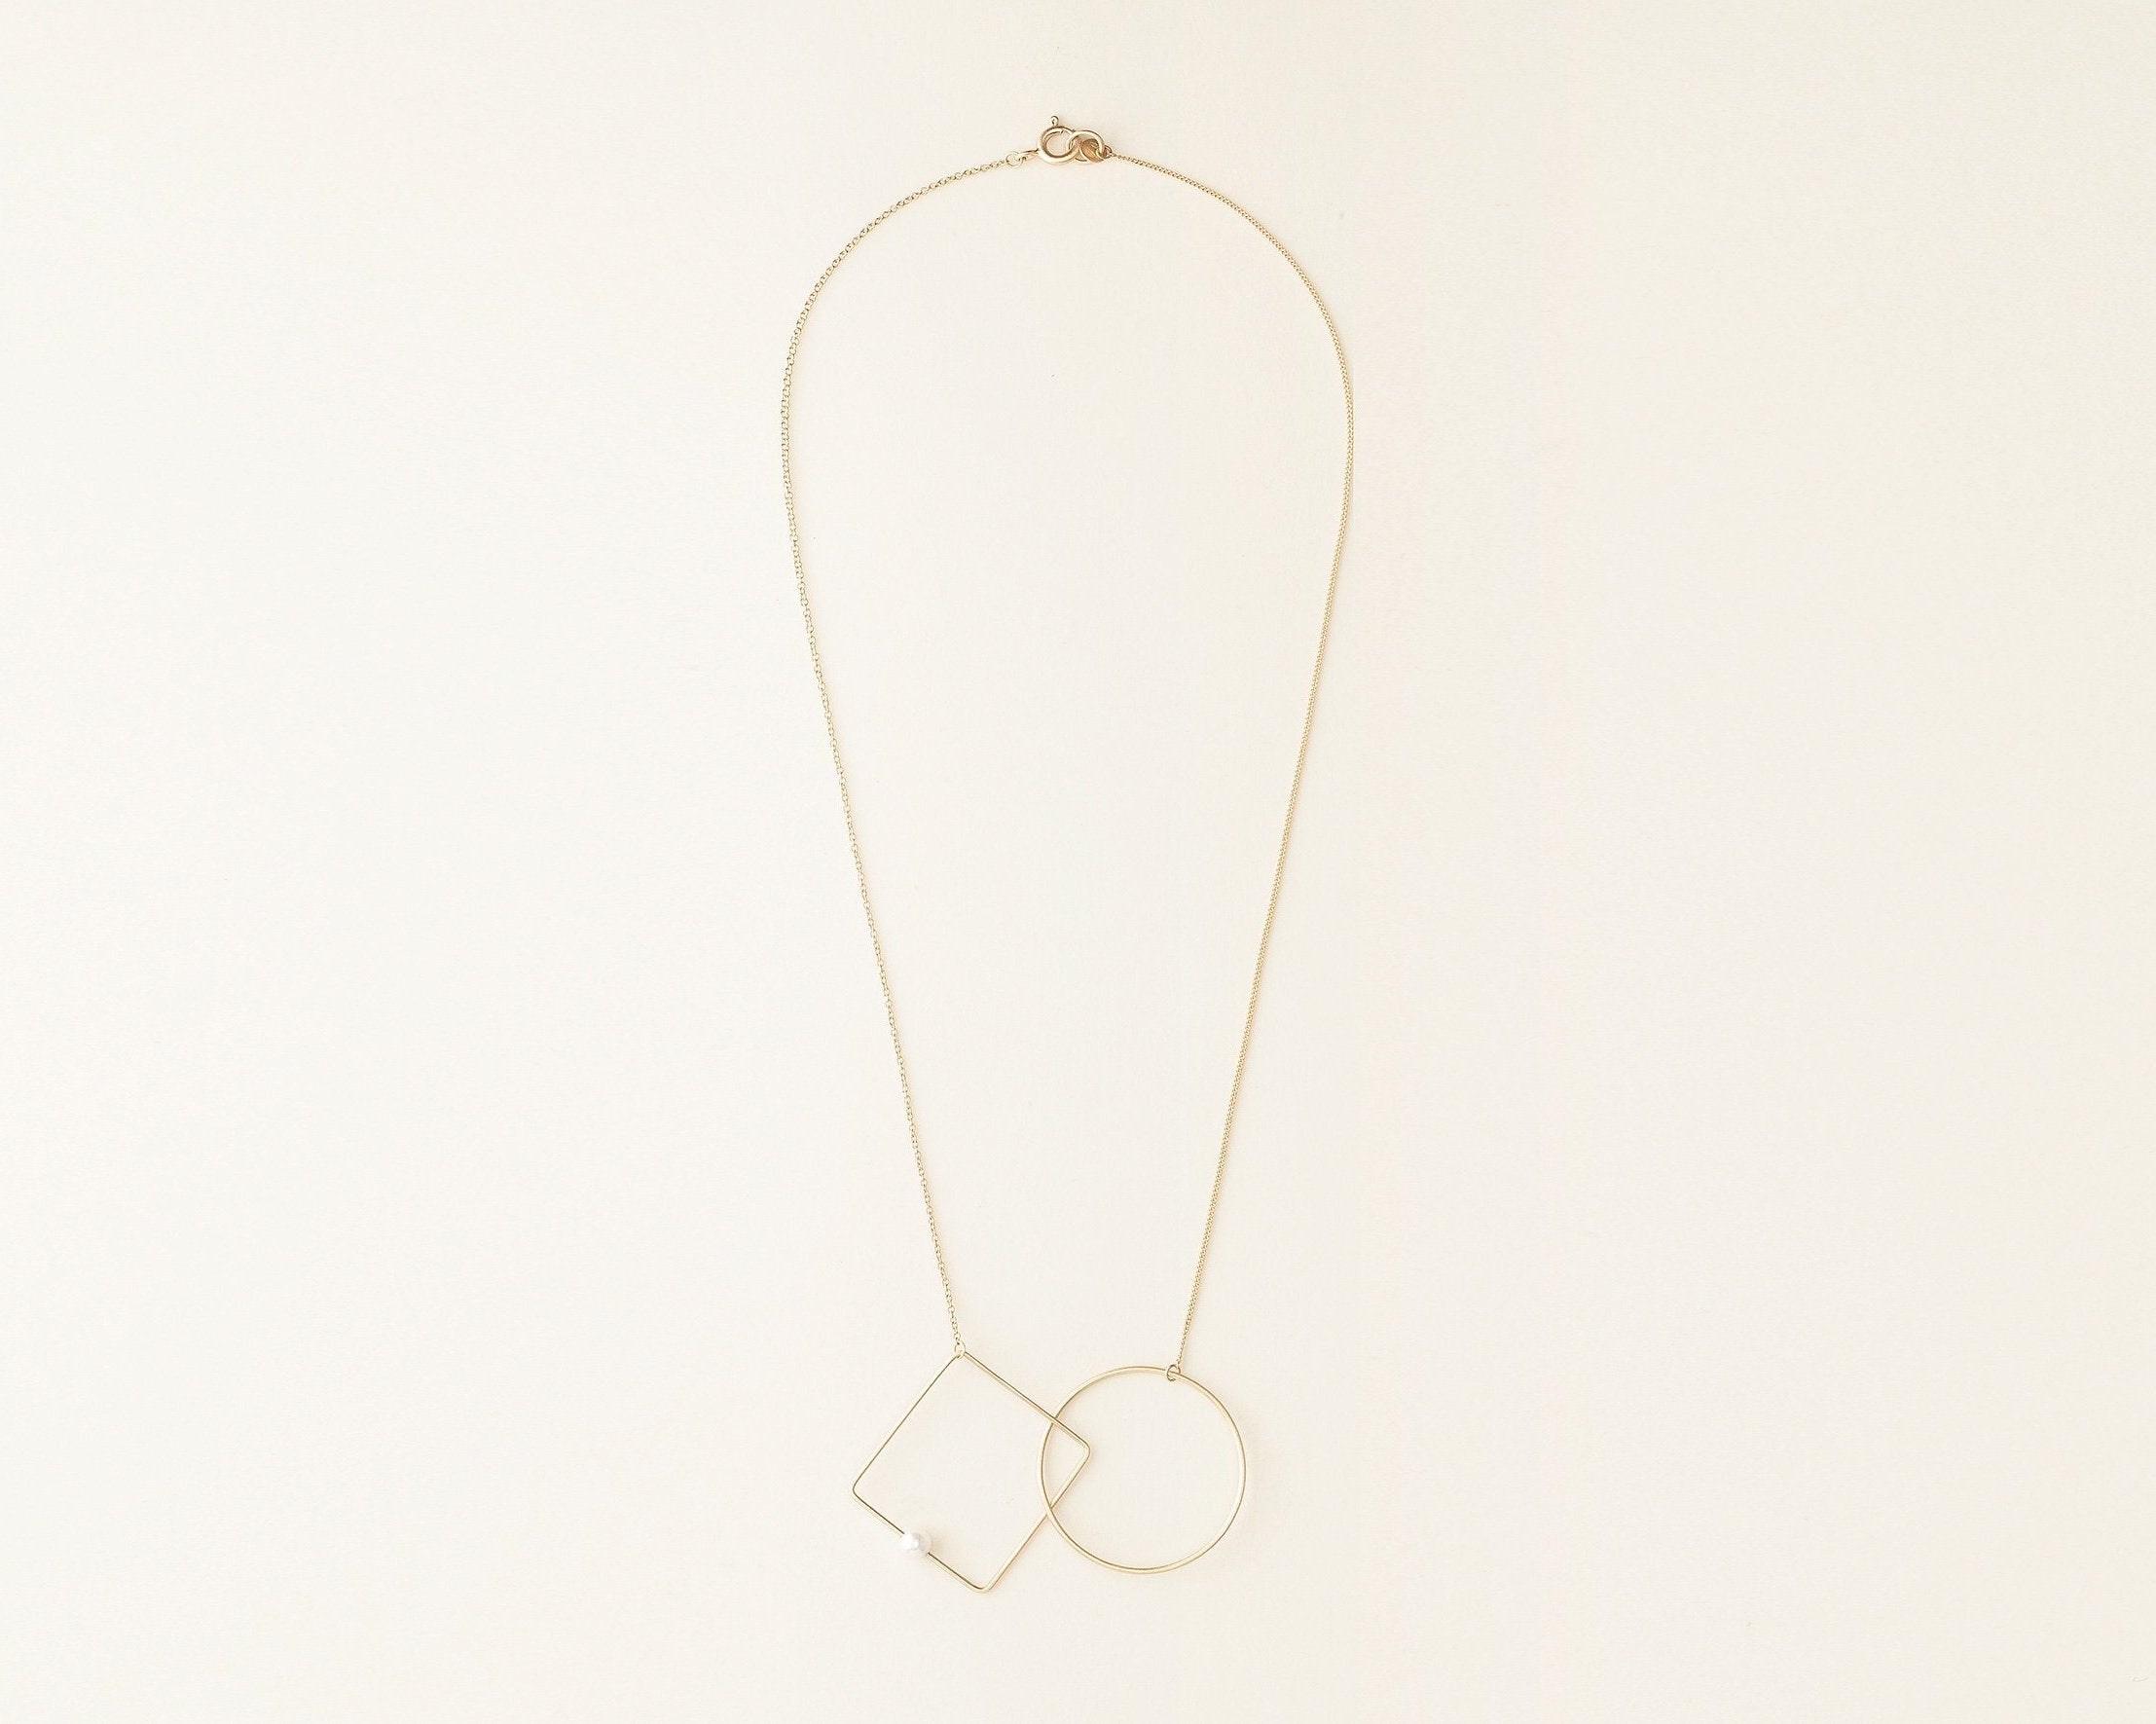 18KT yellow gold necklace with geometric elements and akoya pearl (diameter 4,5mm) - Cerchio Quadrato N